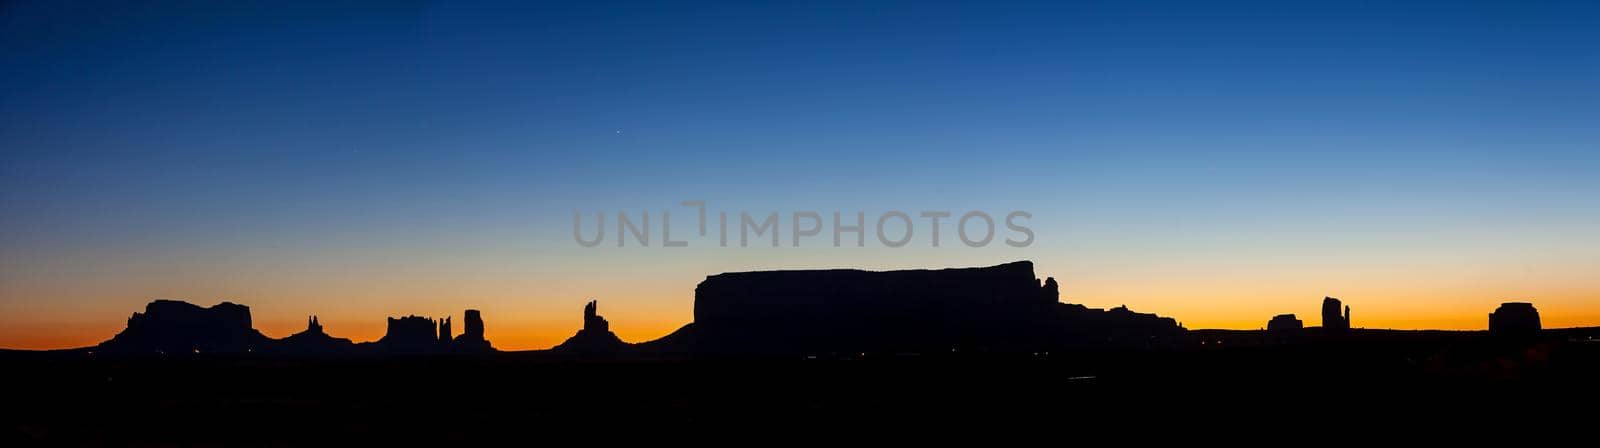 The unique nature landscape of Monument Valley in Utah, USA at sunset